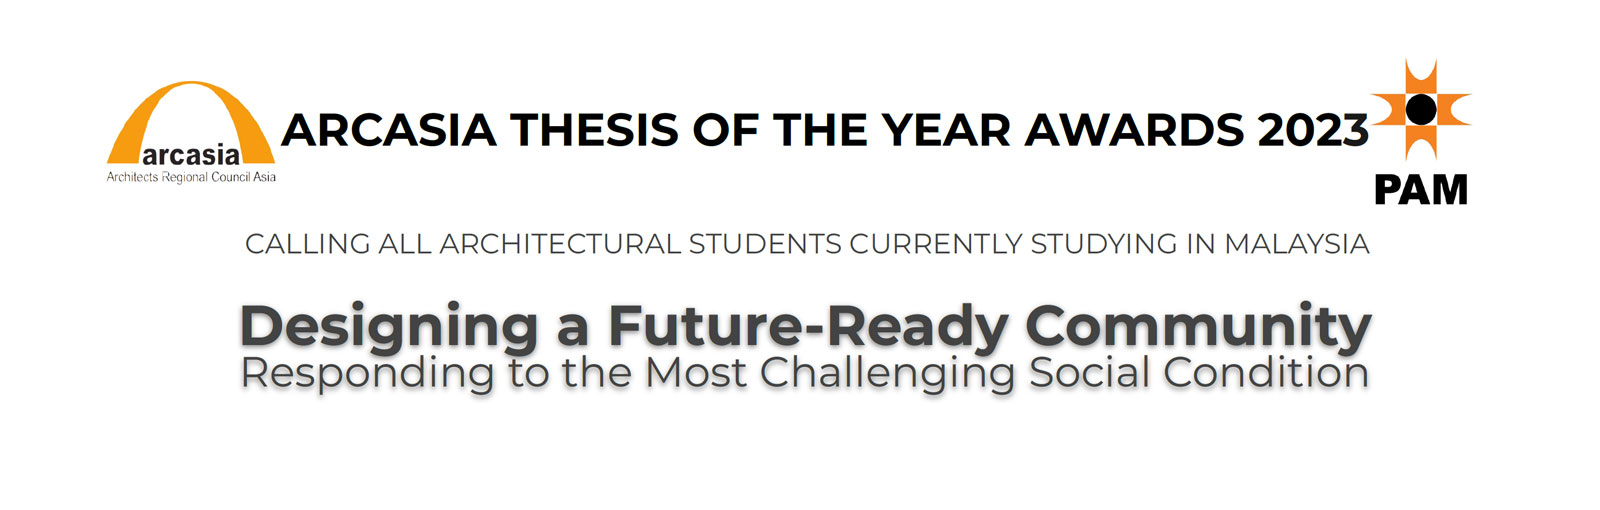 ARCASIA THESIS OF THE YEAR AWARDS 2023 (TOY ARCASIA 2023)